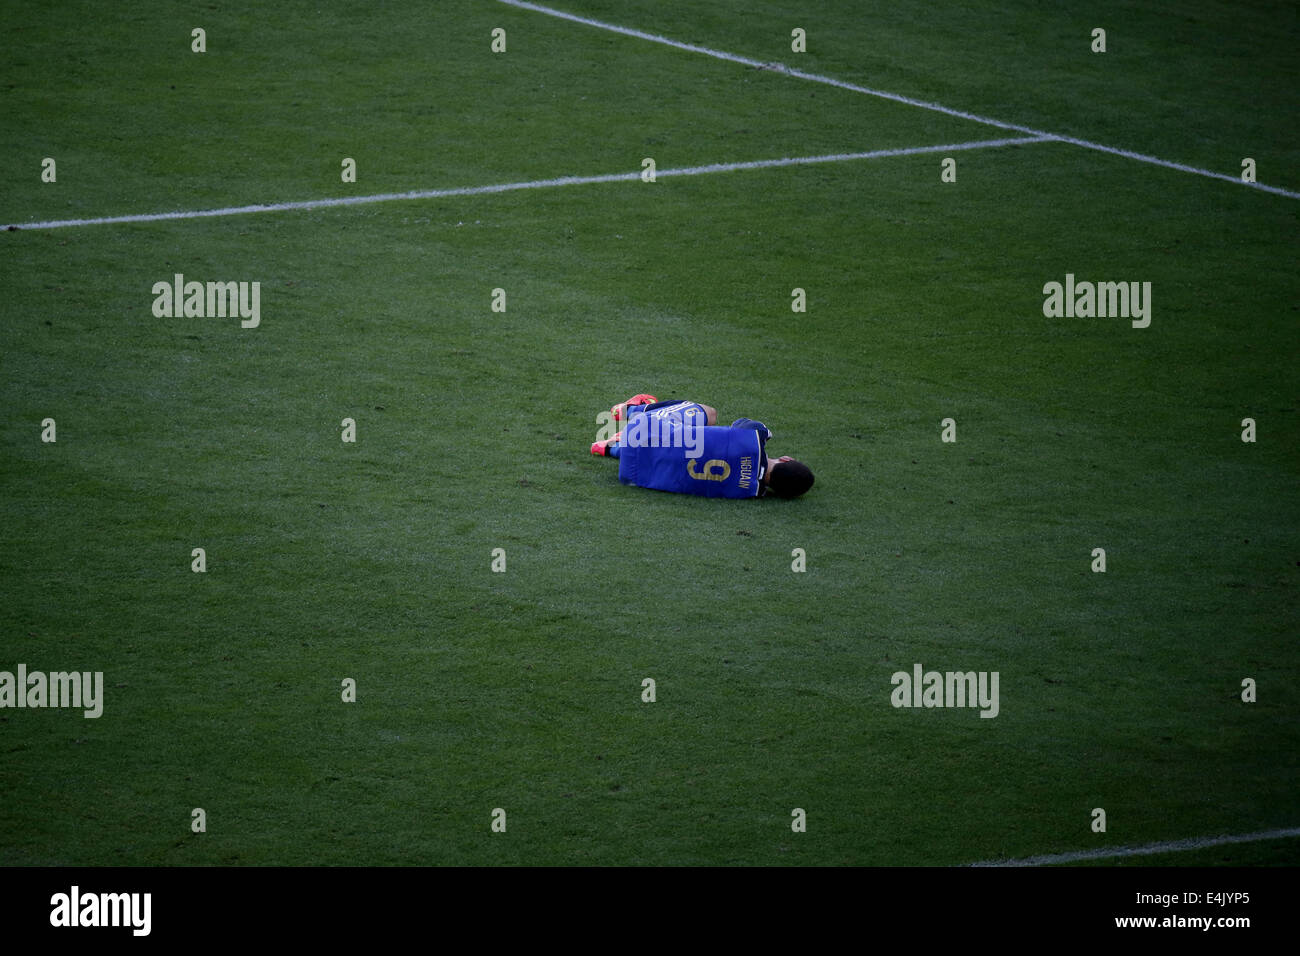 Rio De Janeiro, Brazil. 13th July, 2014. Argentina's Gonzalo Higuain falls down during the final match between Germany and Argentina of 2014 FIFA World Cup at the Estadio do Maracana Stadium in Rio de Janeiro, Brazil, on July 13, 2014. Credit:  Liao Yujie/Xinhua/Alamy Live News Stock Photo